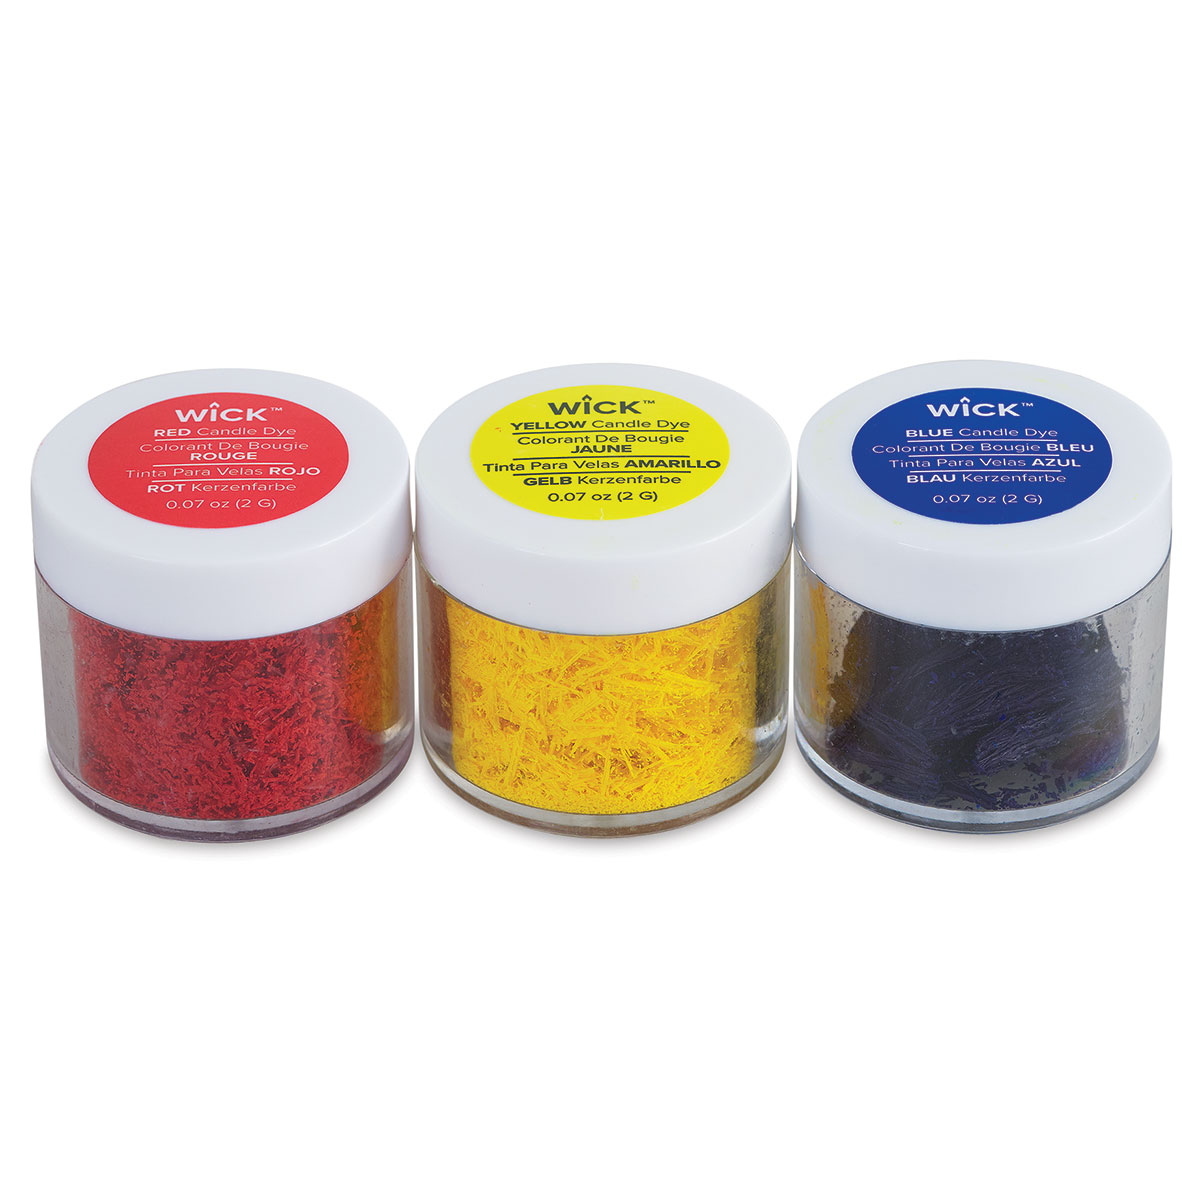 We R Memory Keepers® Wick™ Candle Making Dye